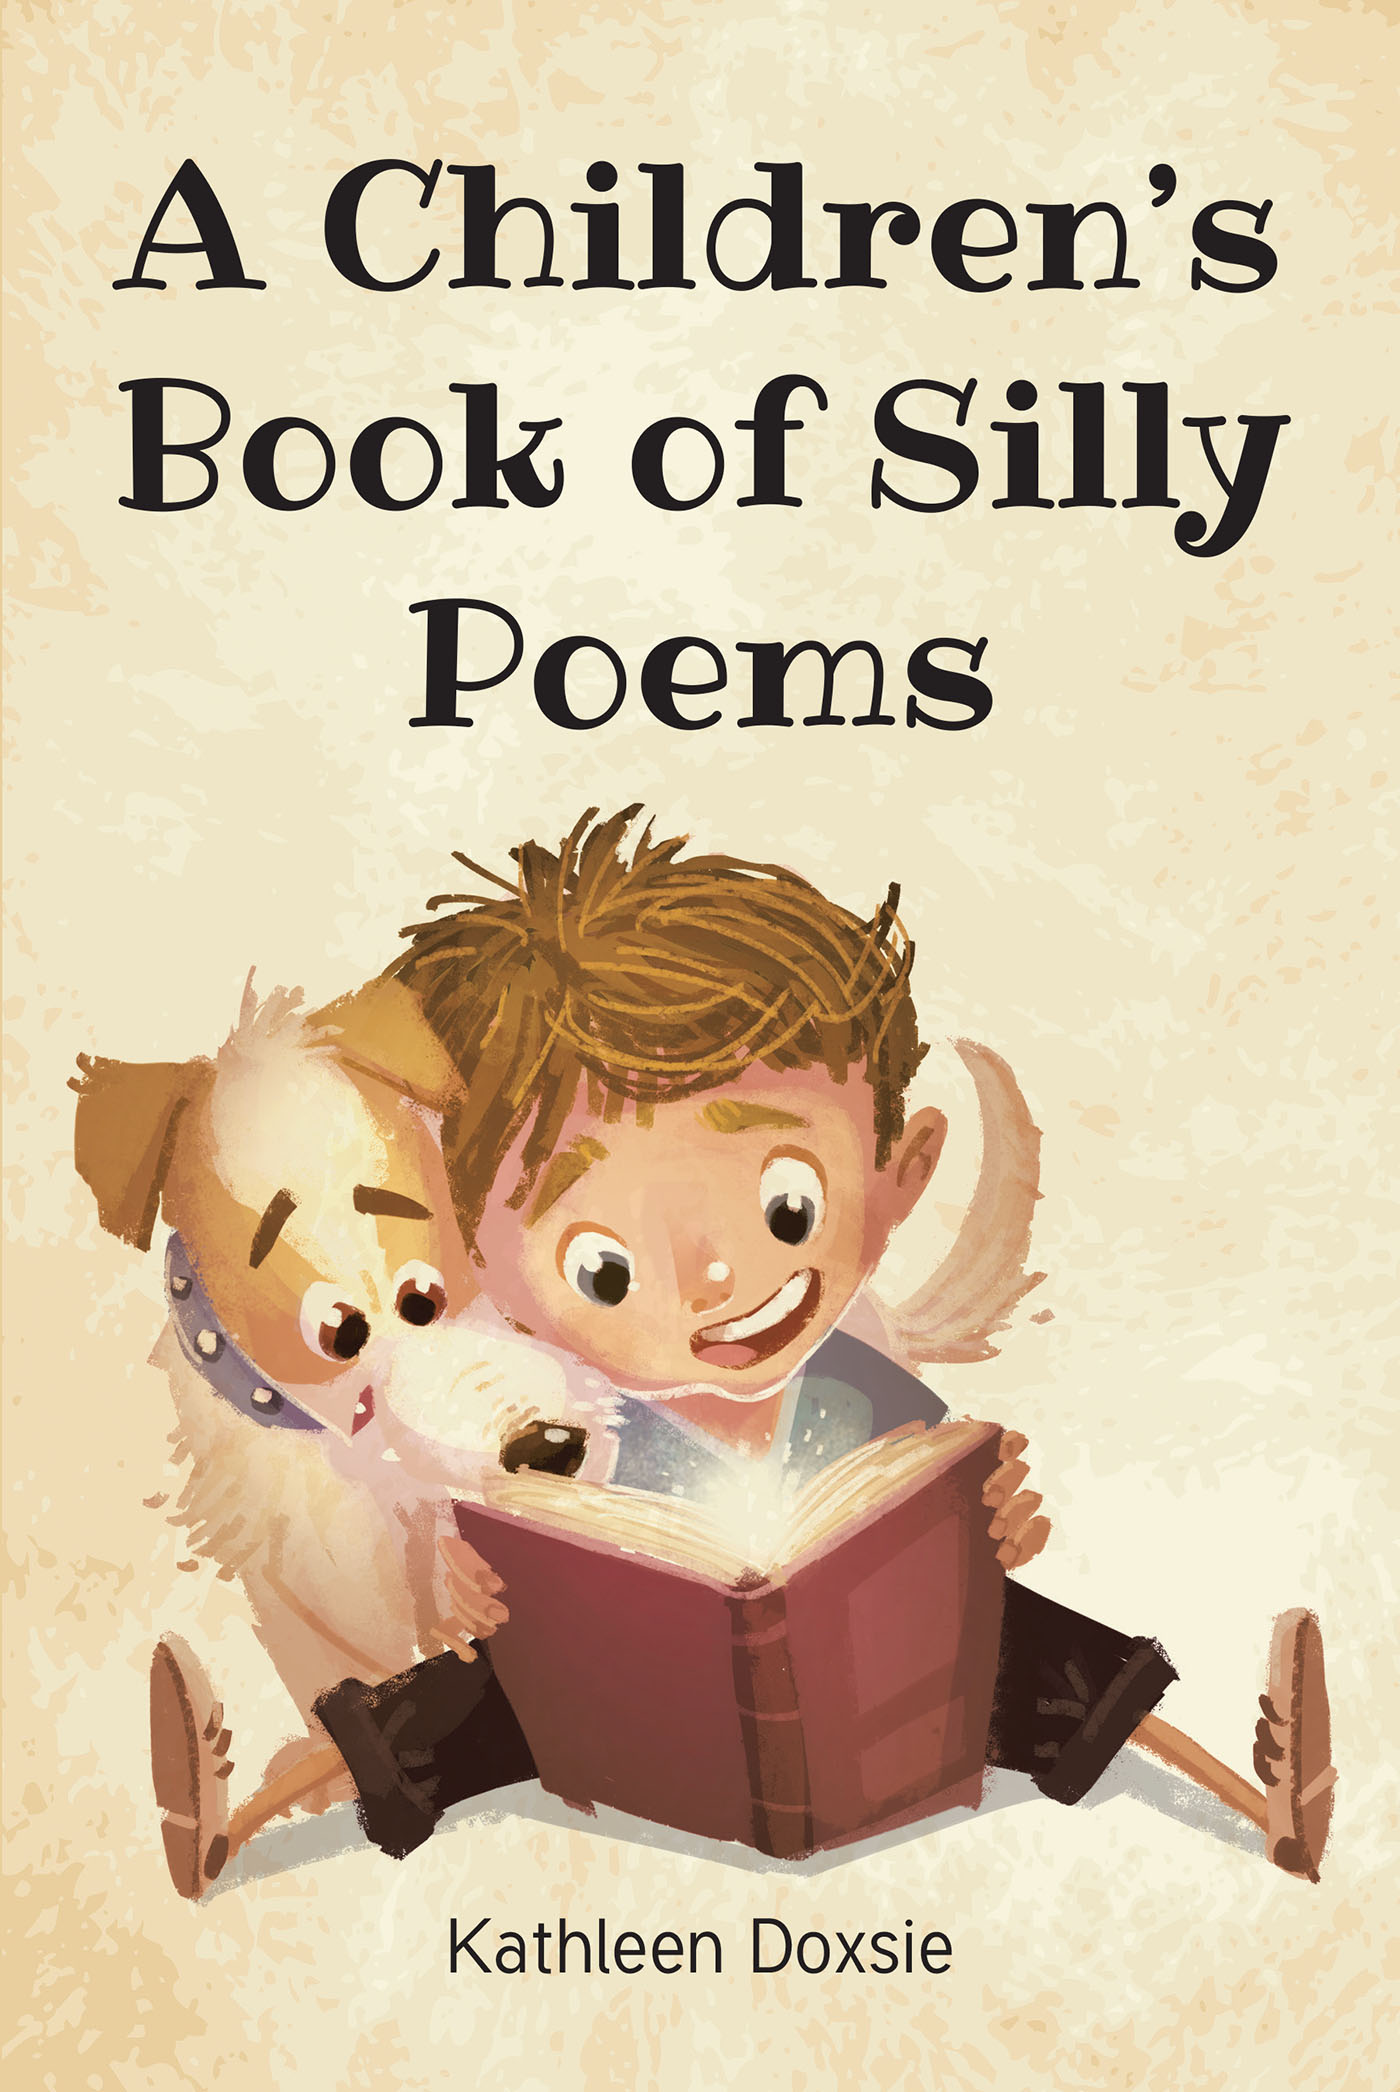 Kathleen Doxsie’s Newly Released "A Children’s Book of Silly Poems" is a Lighthearted Collection of Amusing Poetry for Young Imaginations